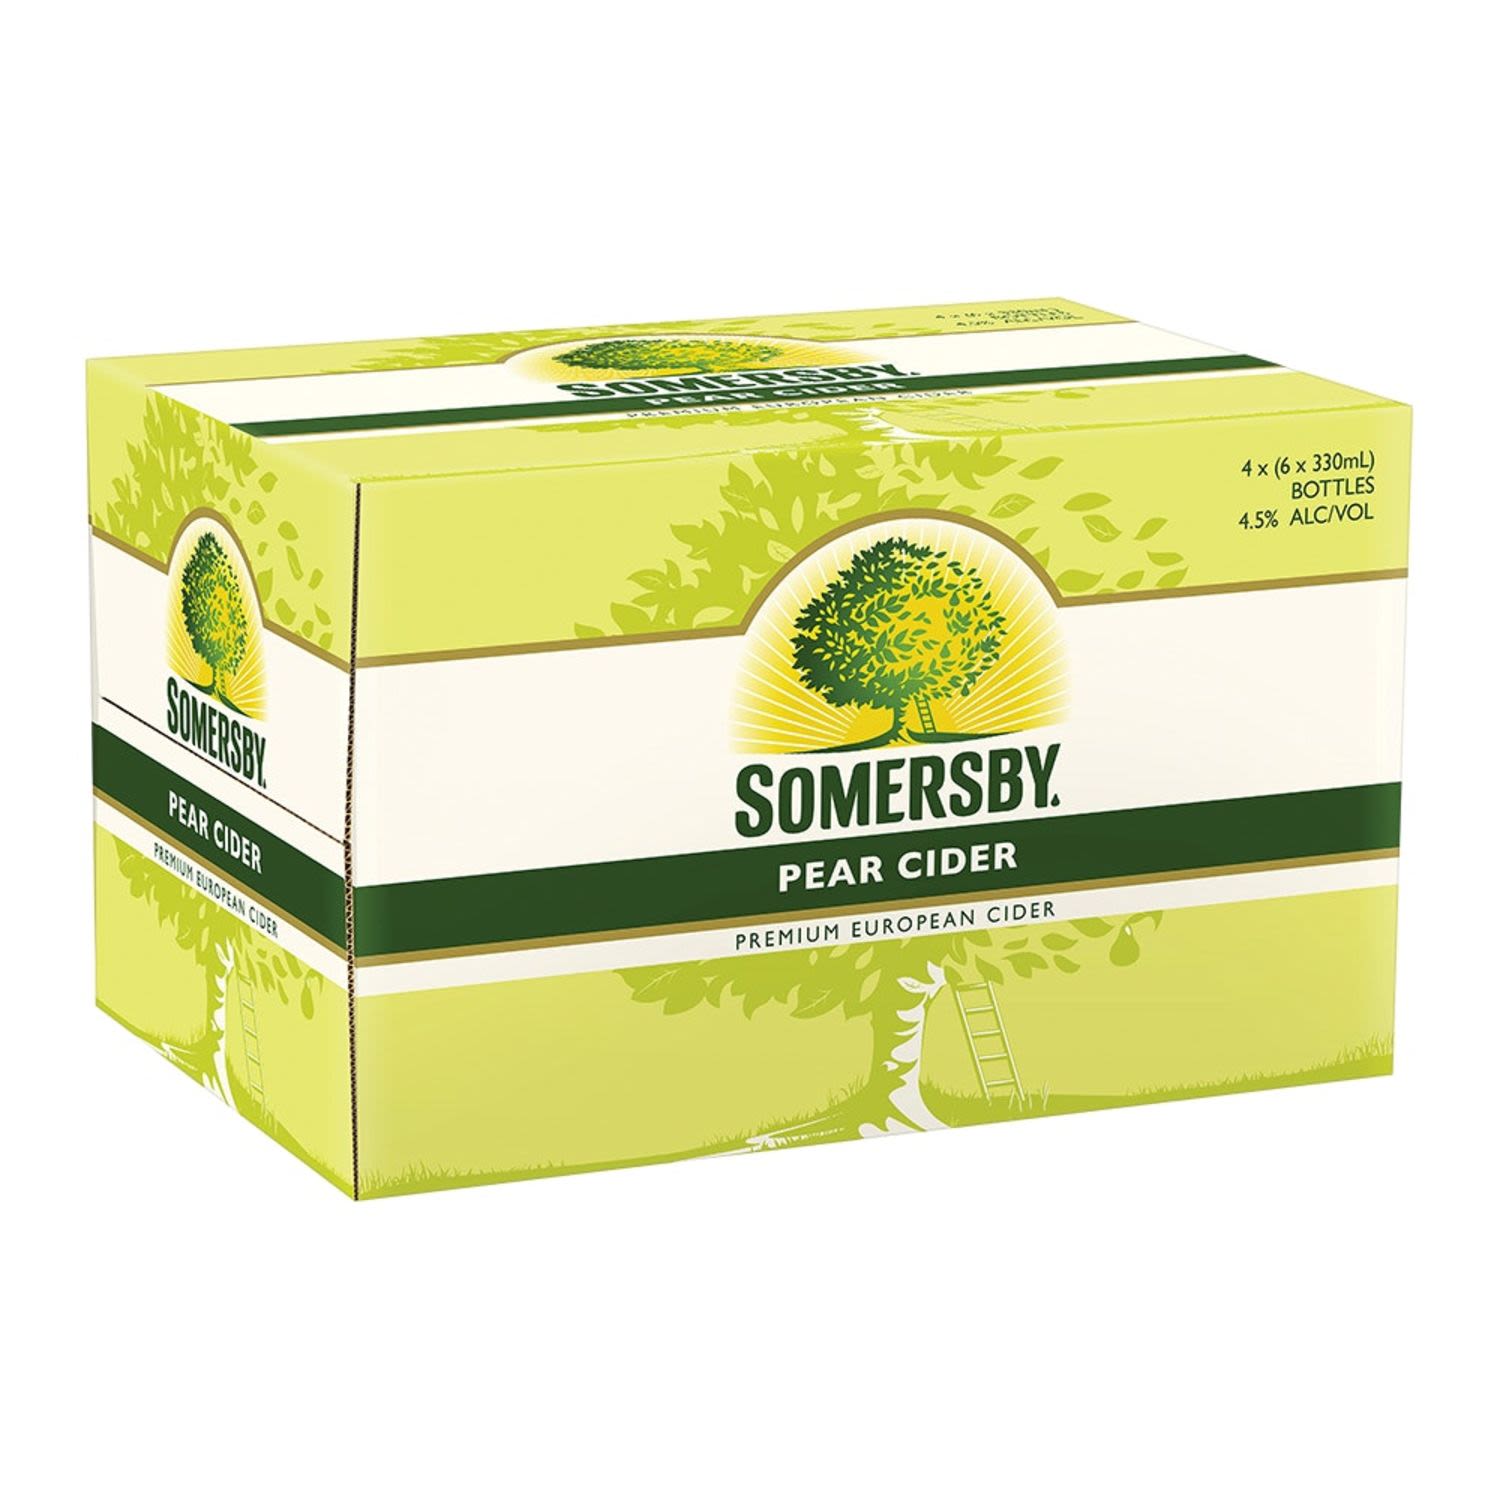 Somersby Pear Cider is a refreshing and crisp cider made from fermented pear juice and natural pear flavouring. There are no artificial sweeteners, flavours or colourings added and it's sparkling and refreshing nature makes it a perfect addition to any Sunday afternoon.<br /> <br />Alcohol Volume: 4.50%<br /><br />Pack Format: 24 Pack<br /><br />Standard Drinks: 1.2</br /><br />Pack Type: Bottle<br /><br />Country of Origin: Australia<br />